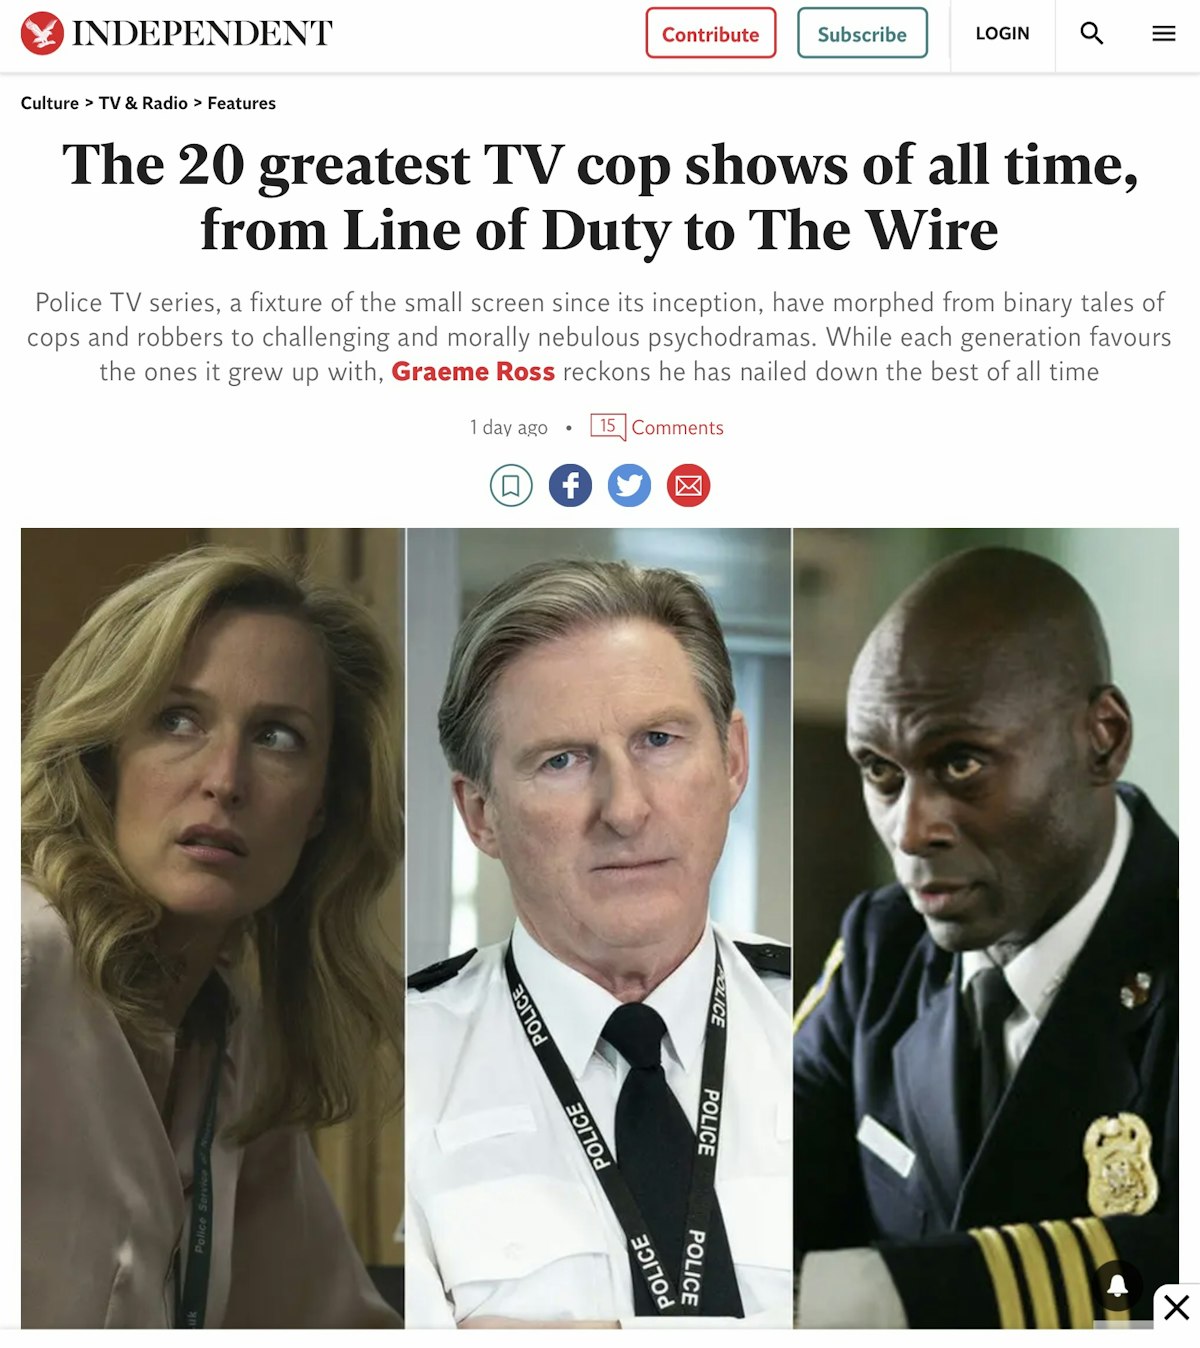 LINE OF DUTY AND THE FALL BOTH NAMED IN THE INDEPENDENT'S TOP 20 TV COP SHOWS OF ALL TIME.